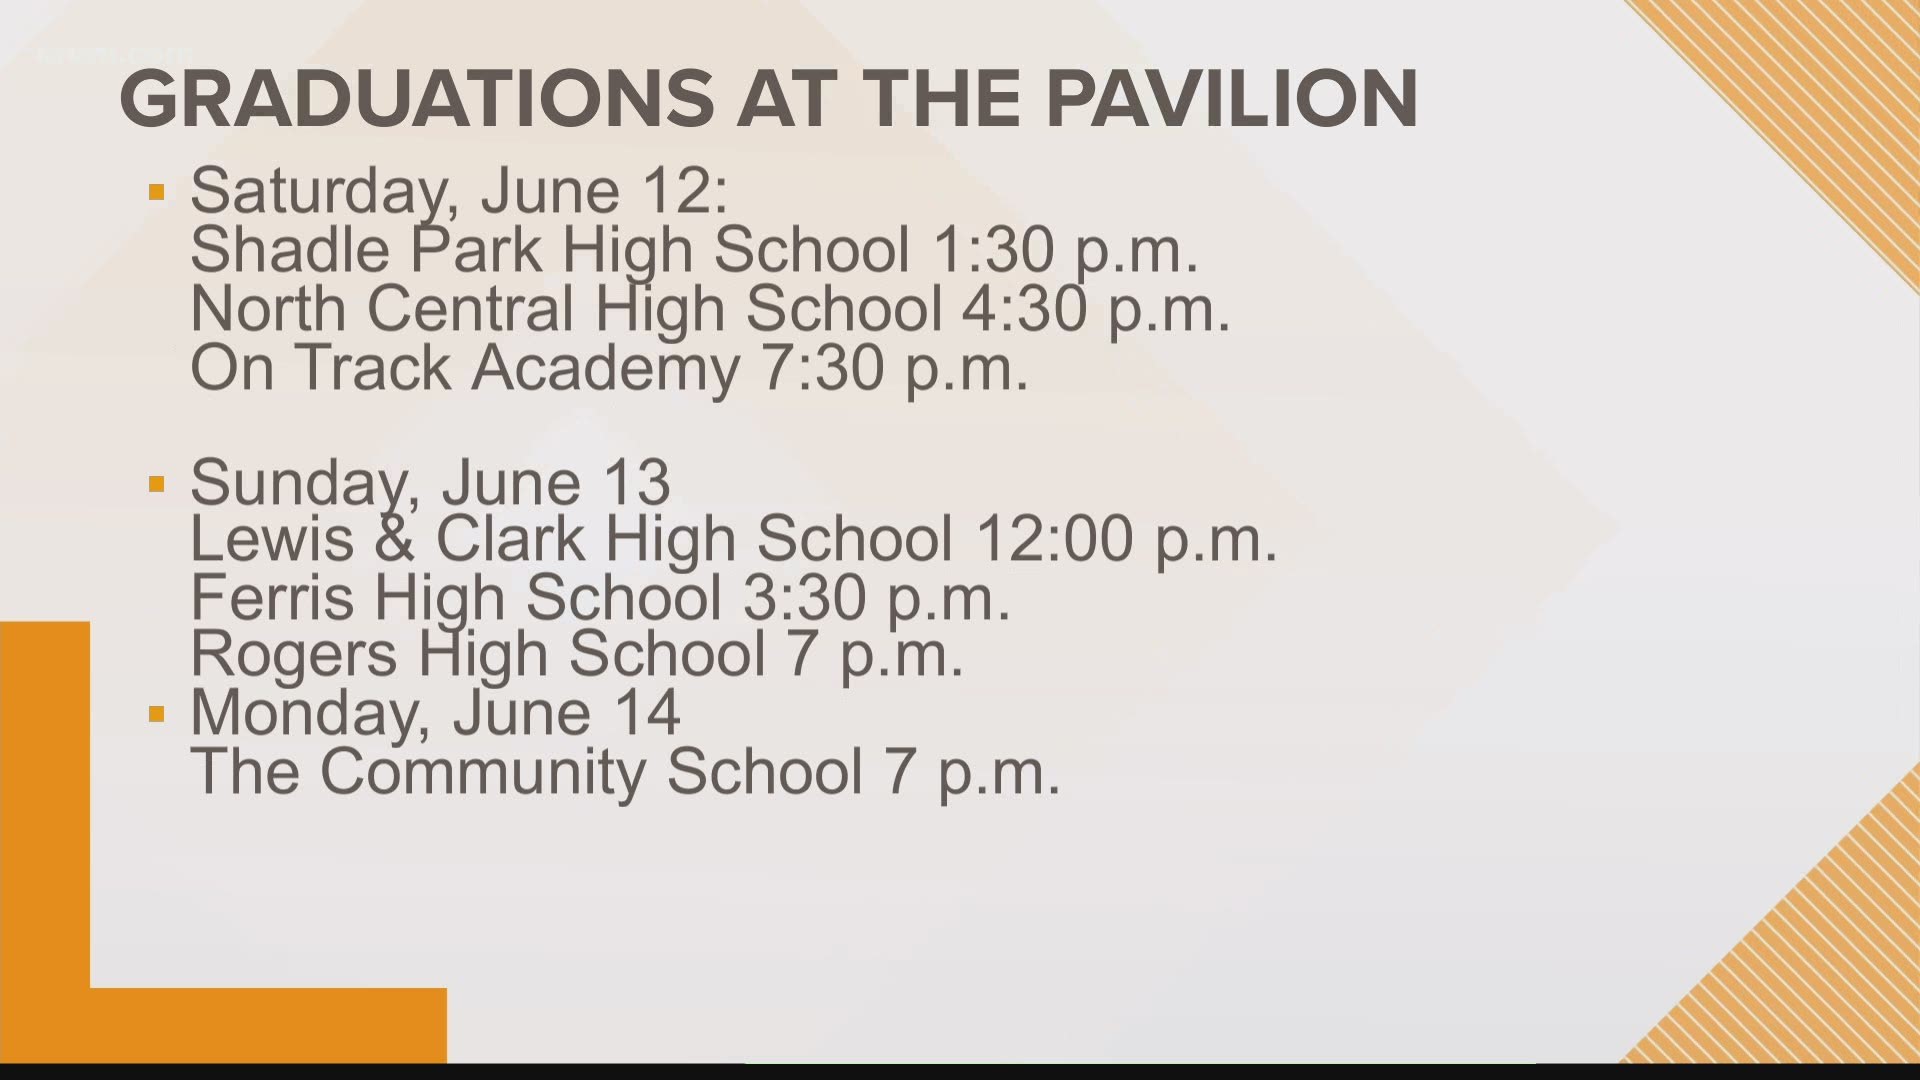 Seven high school graduations are set to happen over the weekend. SPS will follow DOH requirements to make the events safe for families.